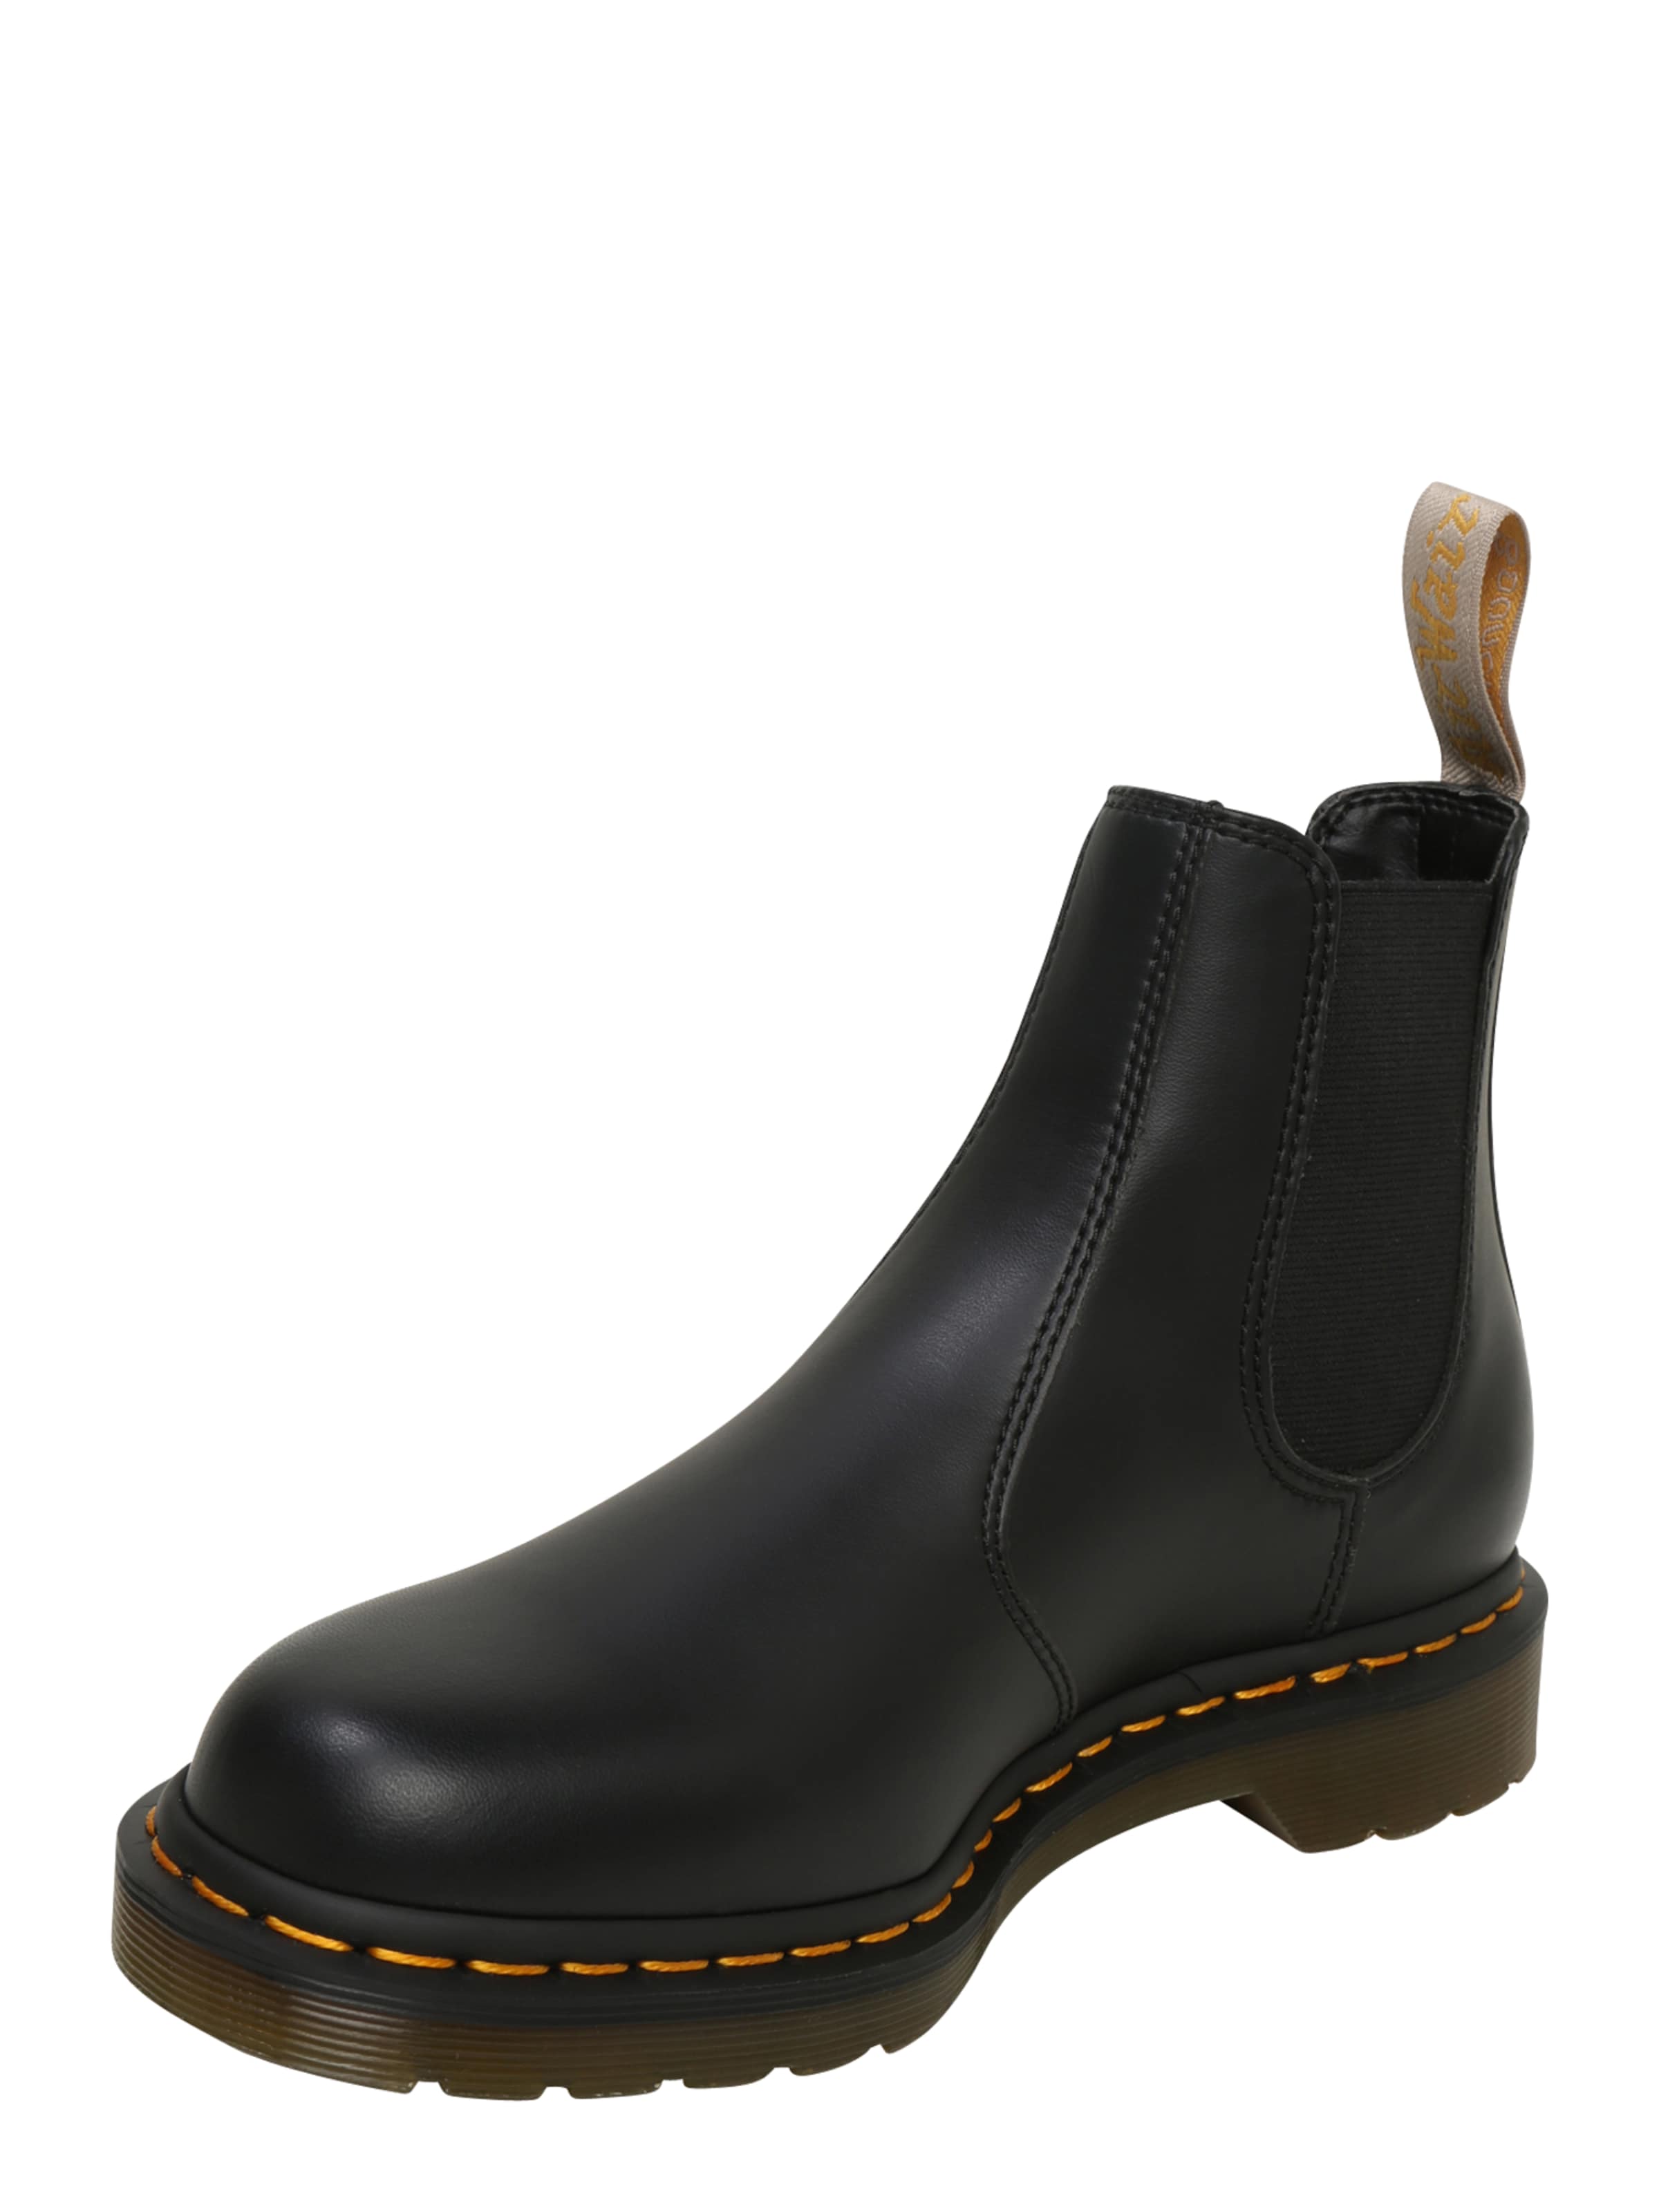 Women Ankle boots | Dr. Martens Chelsea Boots in Black - AA99460